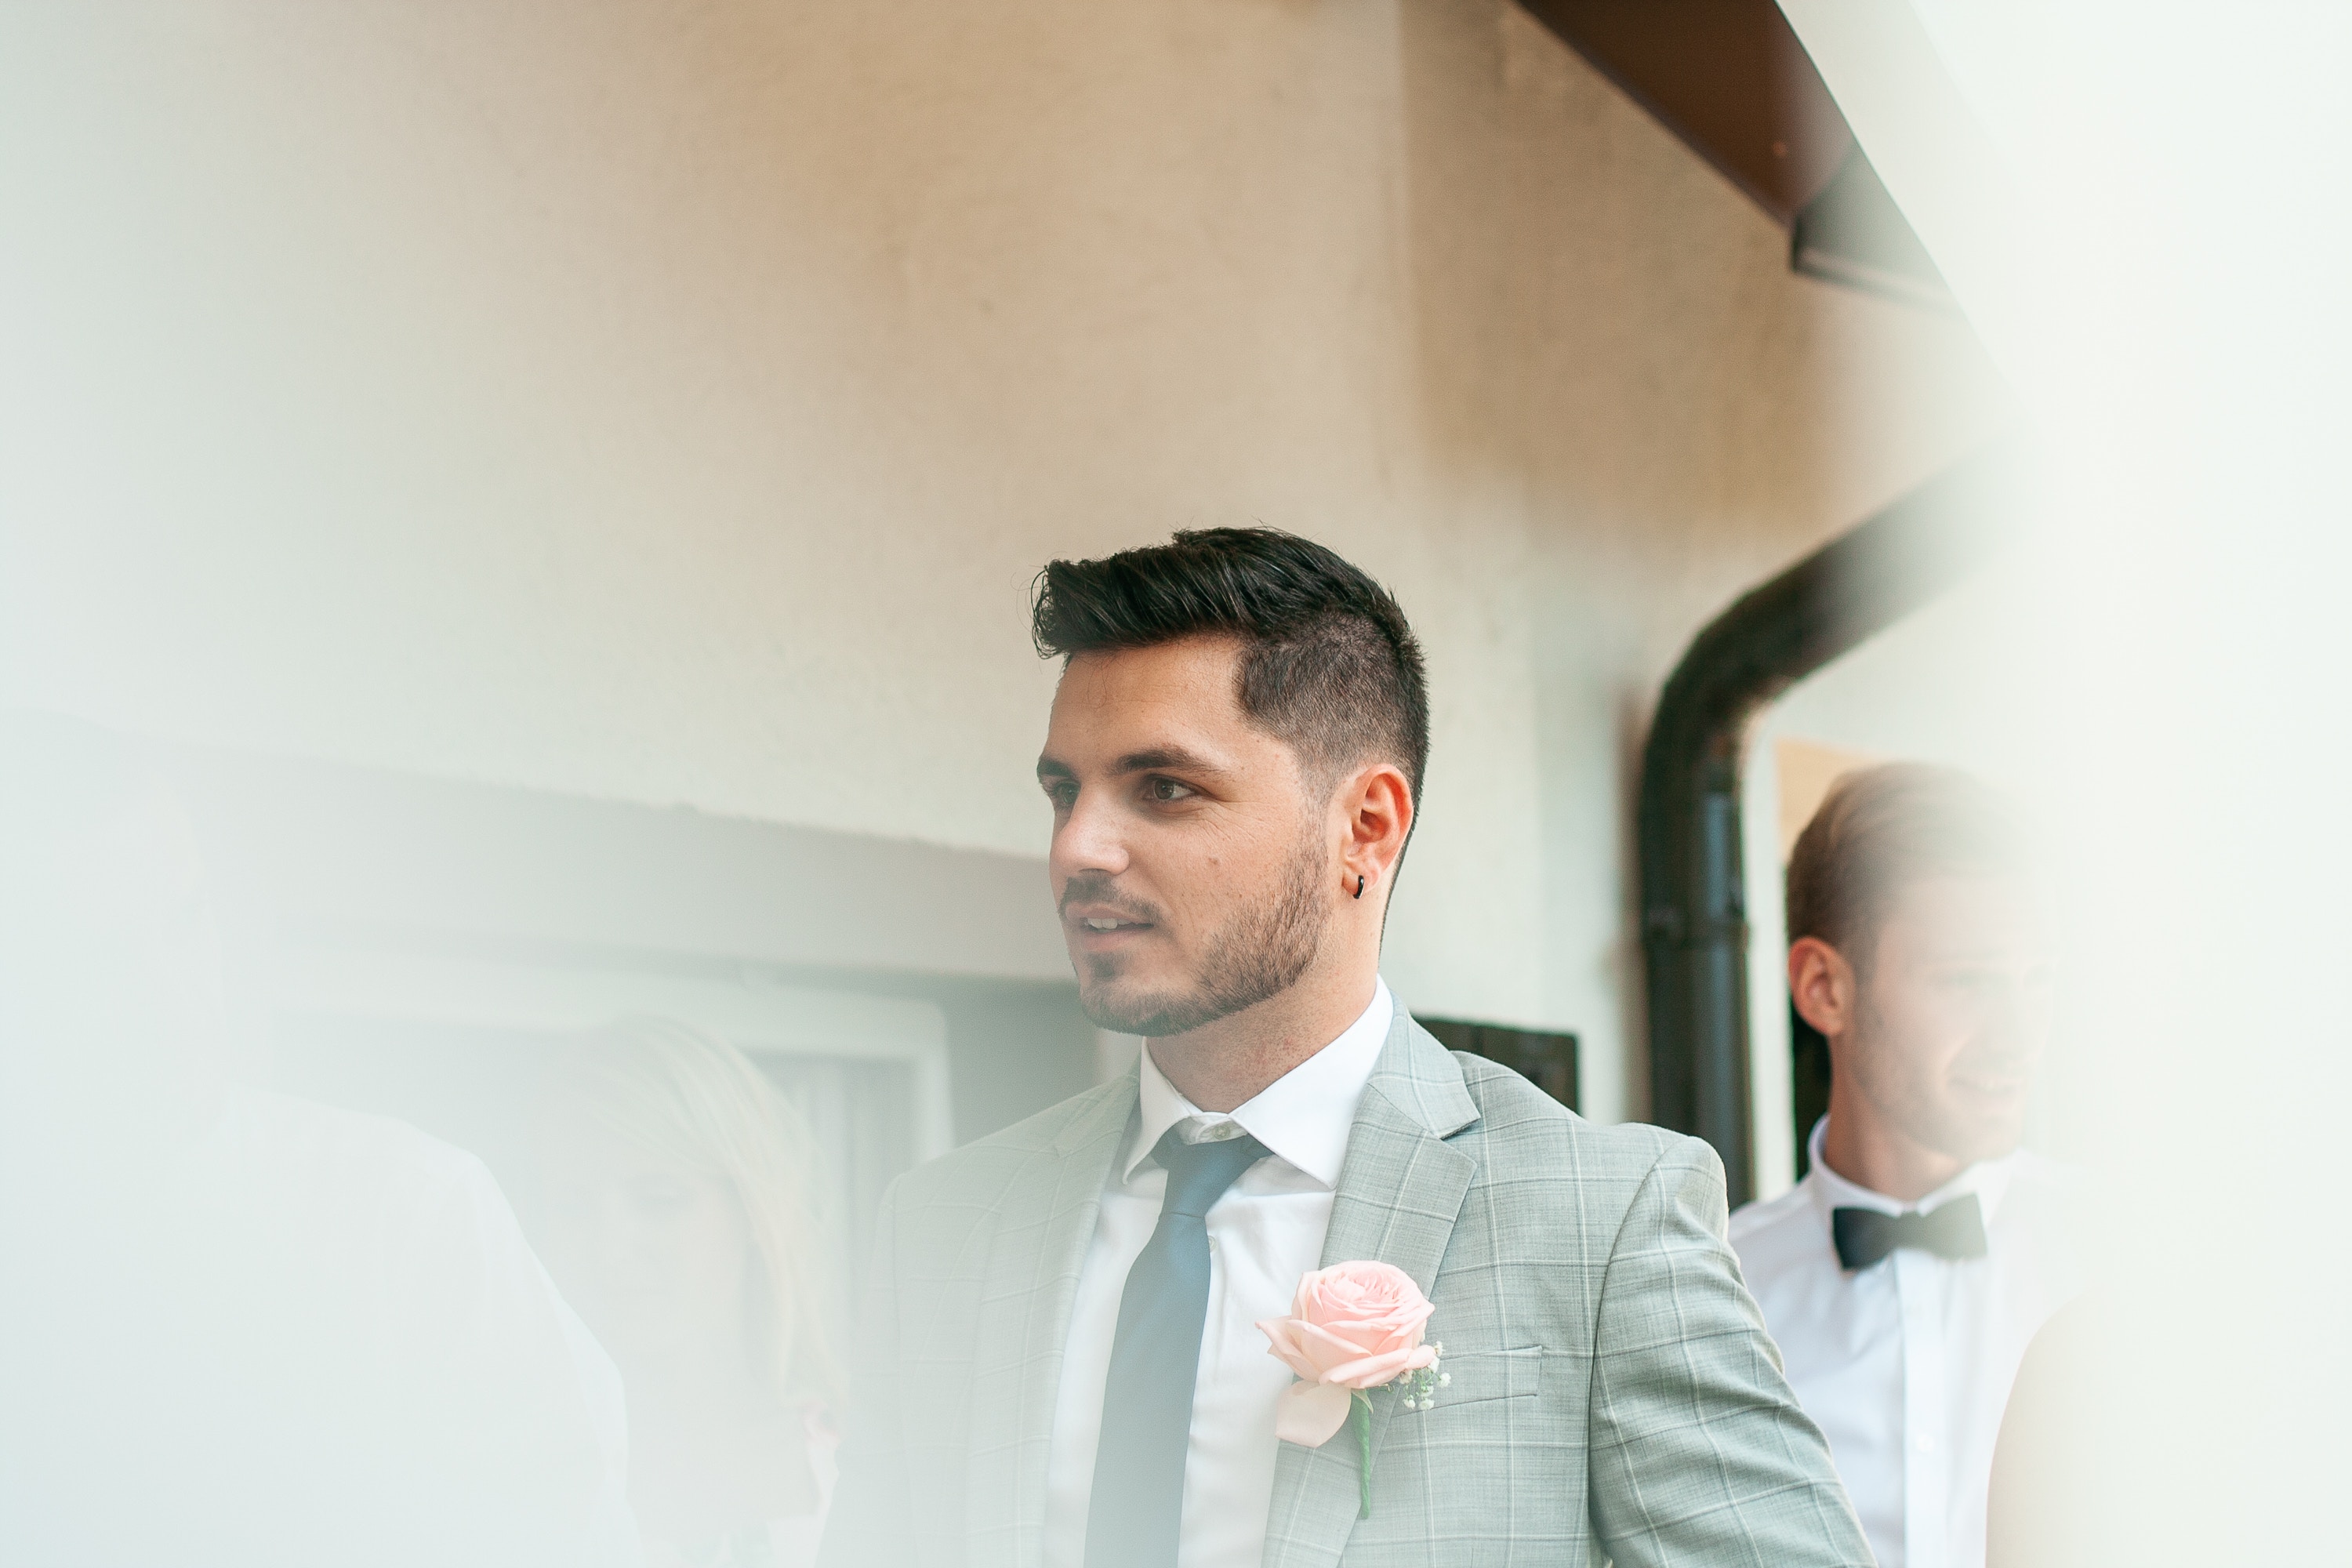 Do Men Fantasize About Their Weddings? Here's What Some Guys Had to Say...